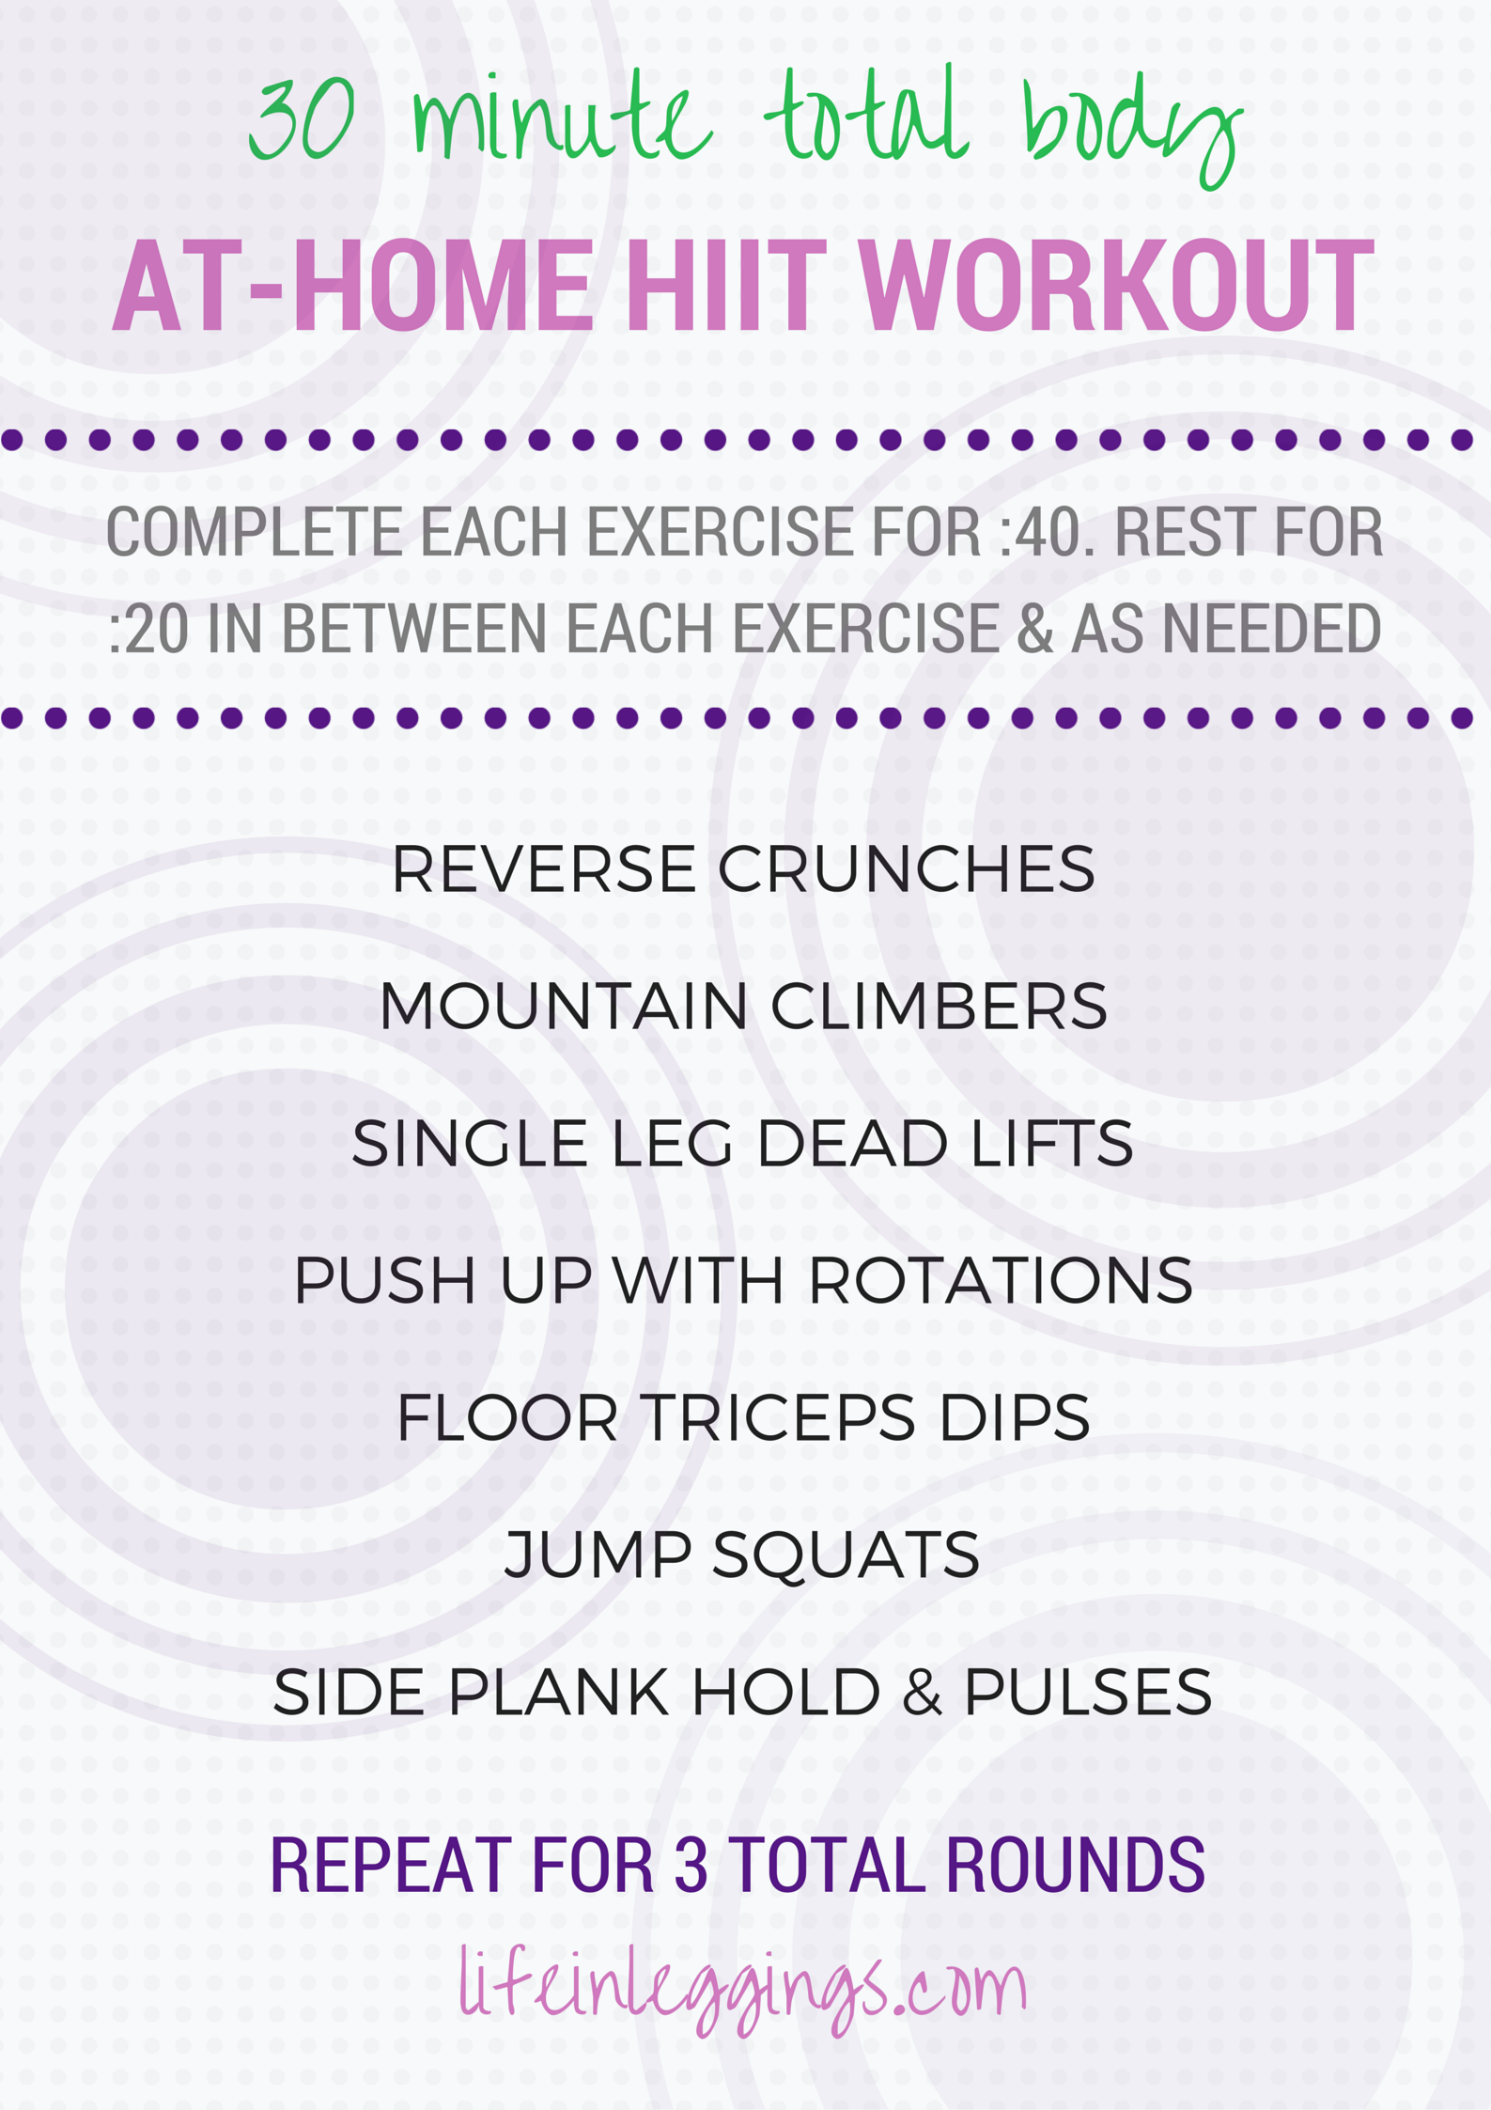 30 minute at-home hiit workout